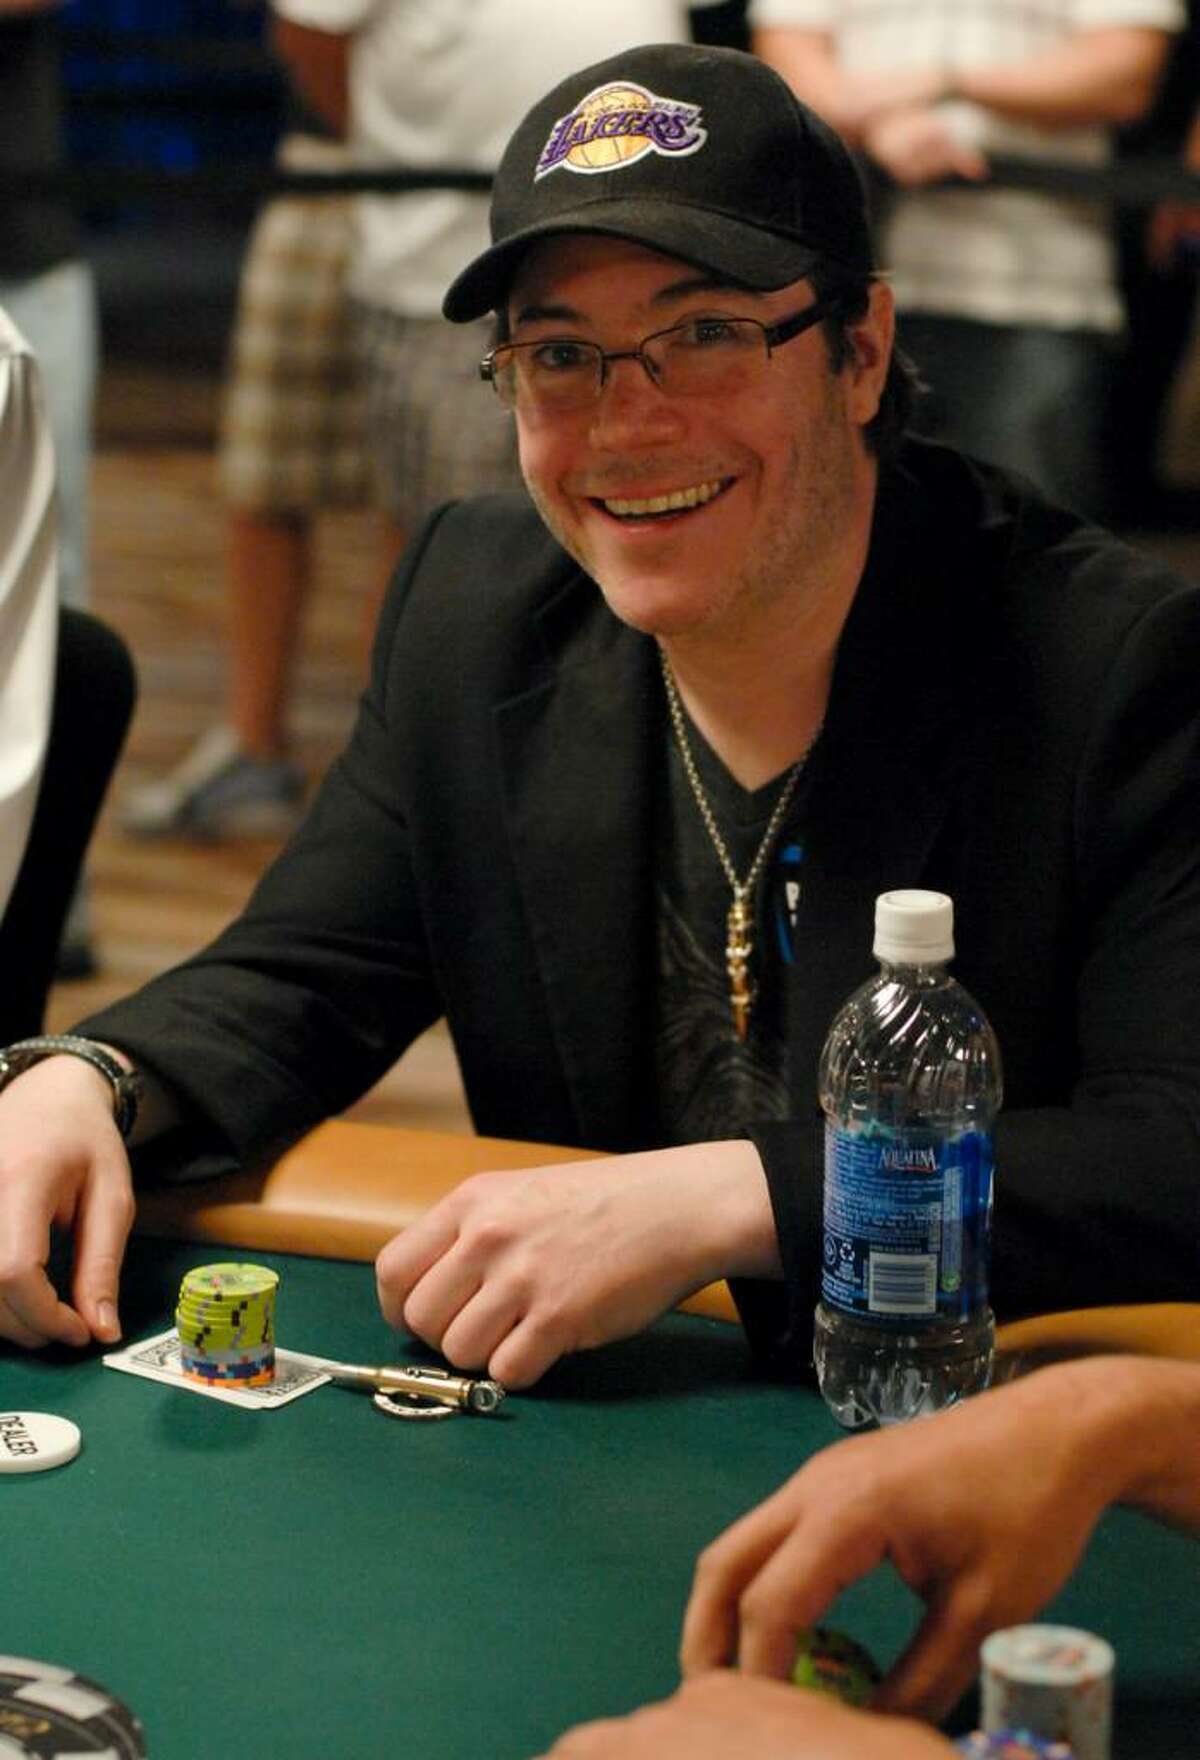 Jamie Gold graudated from UAlbany in 1991 and won the World Series of Poker Main Event in 2006.. (Courtesy IMPDI)